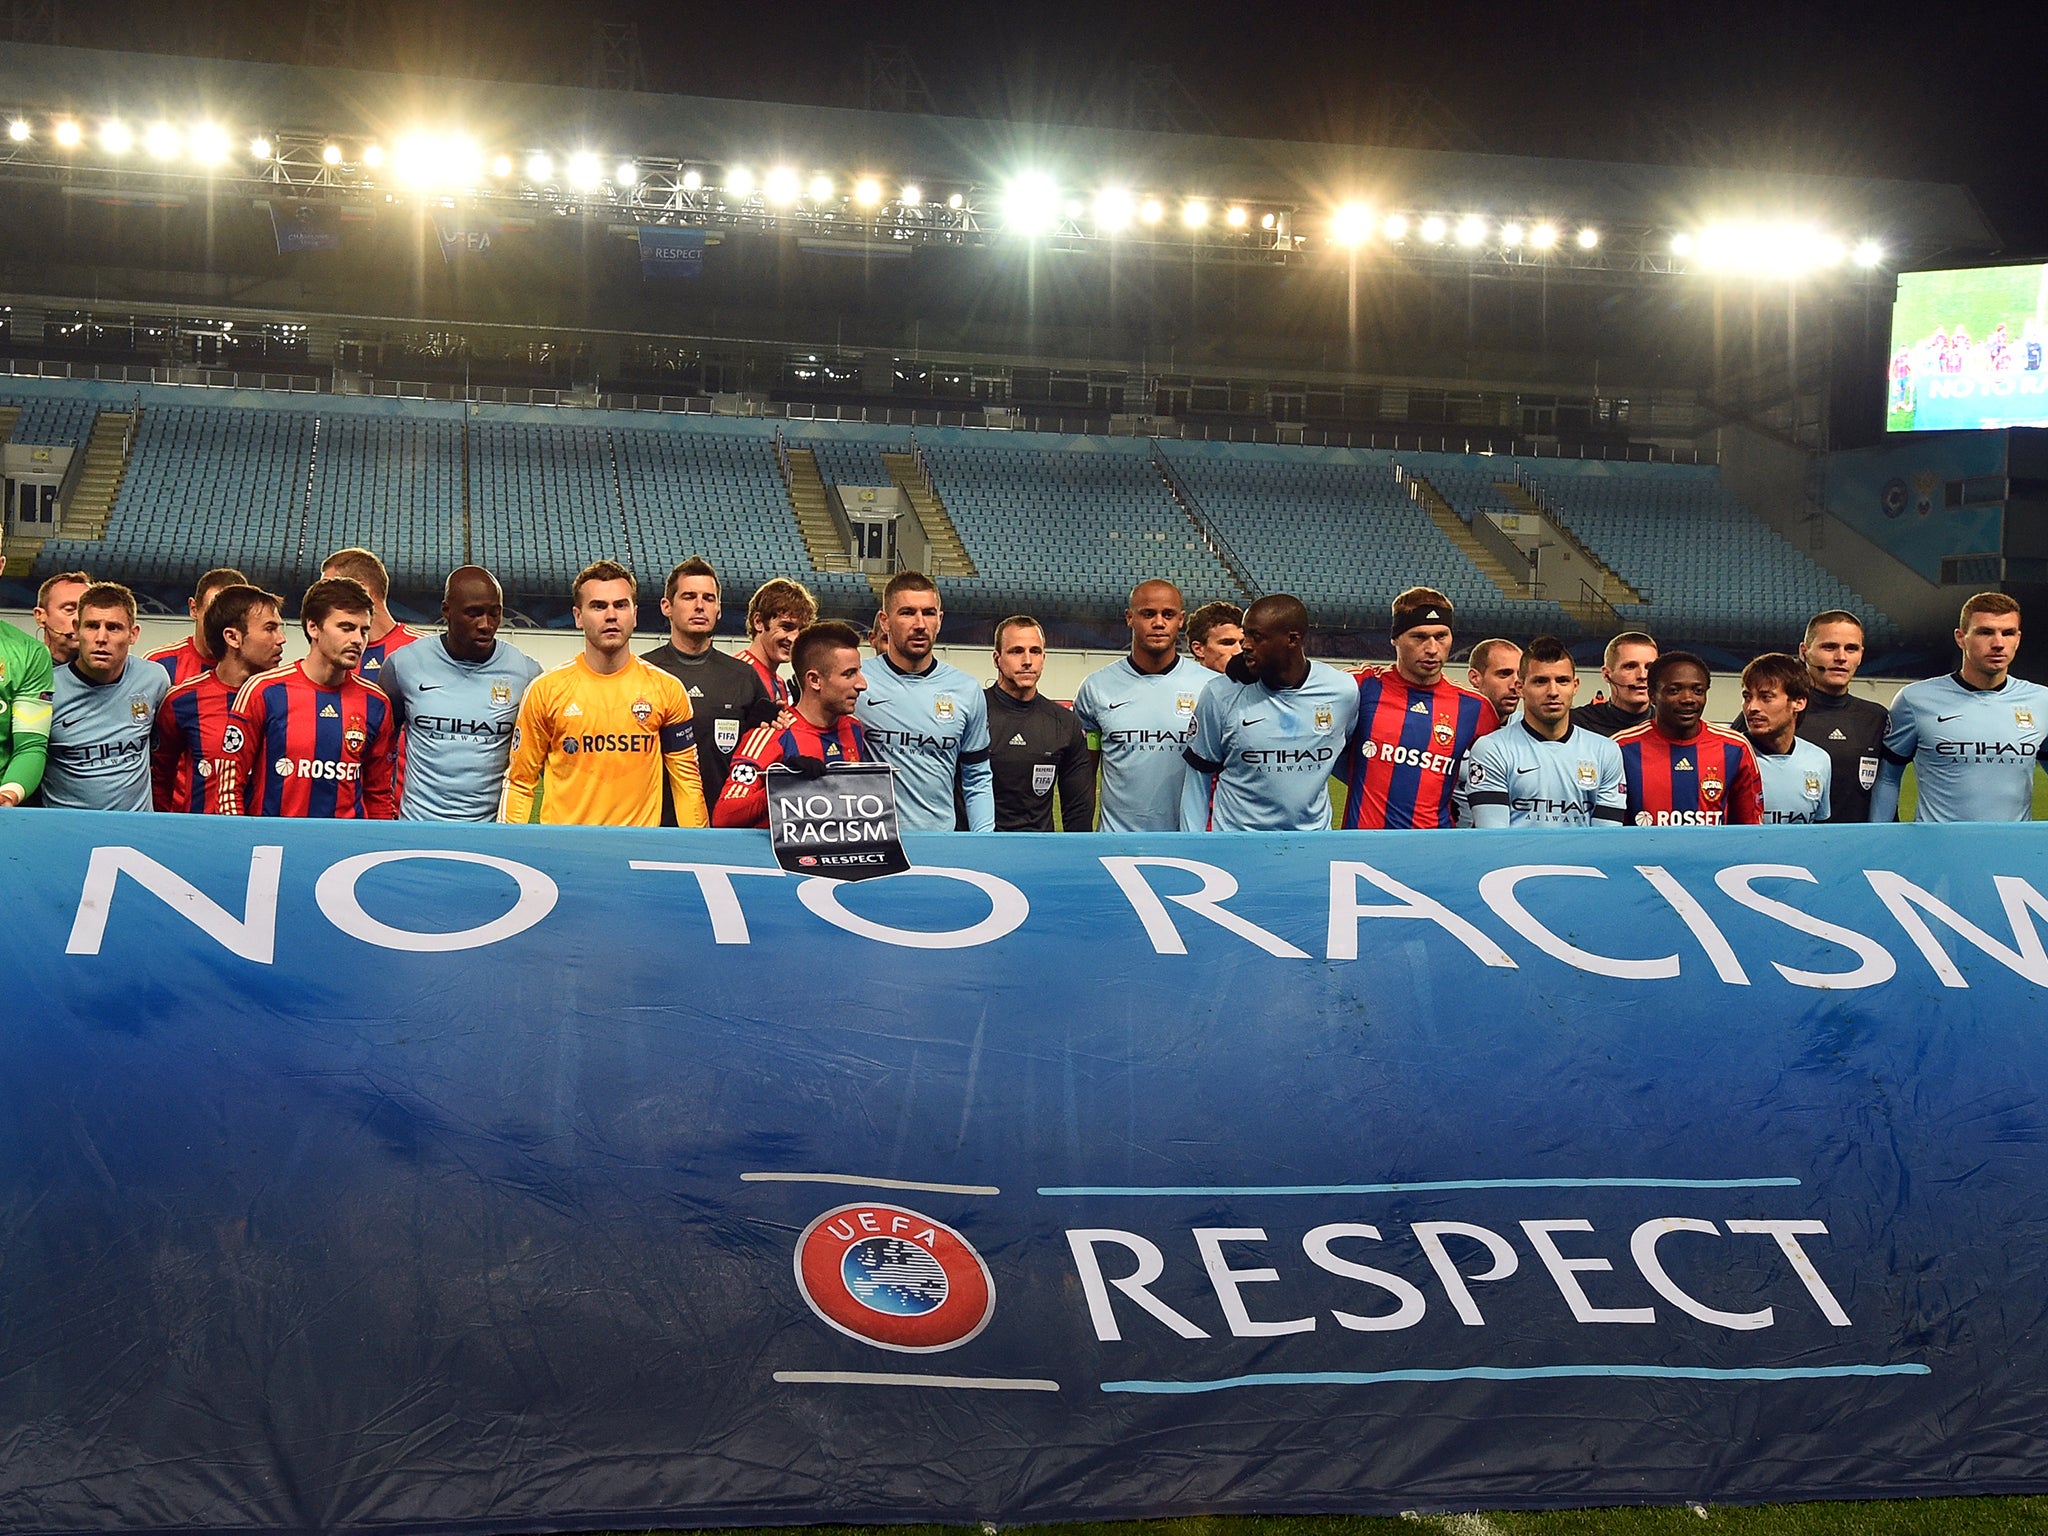 Manchester City and CSKA Moscow with an anti-racism banner